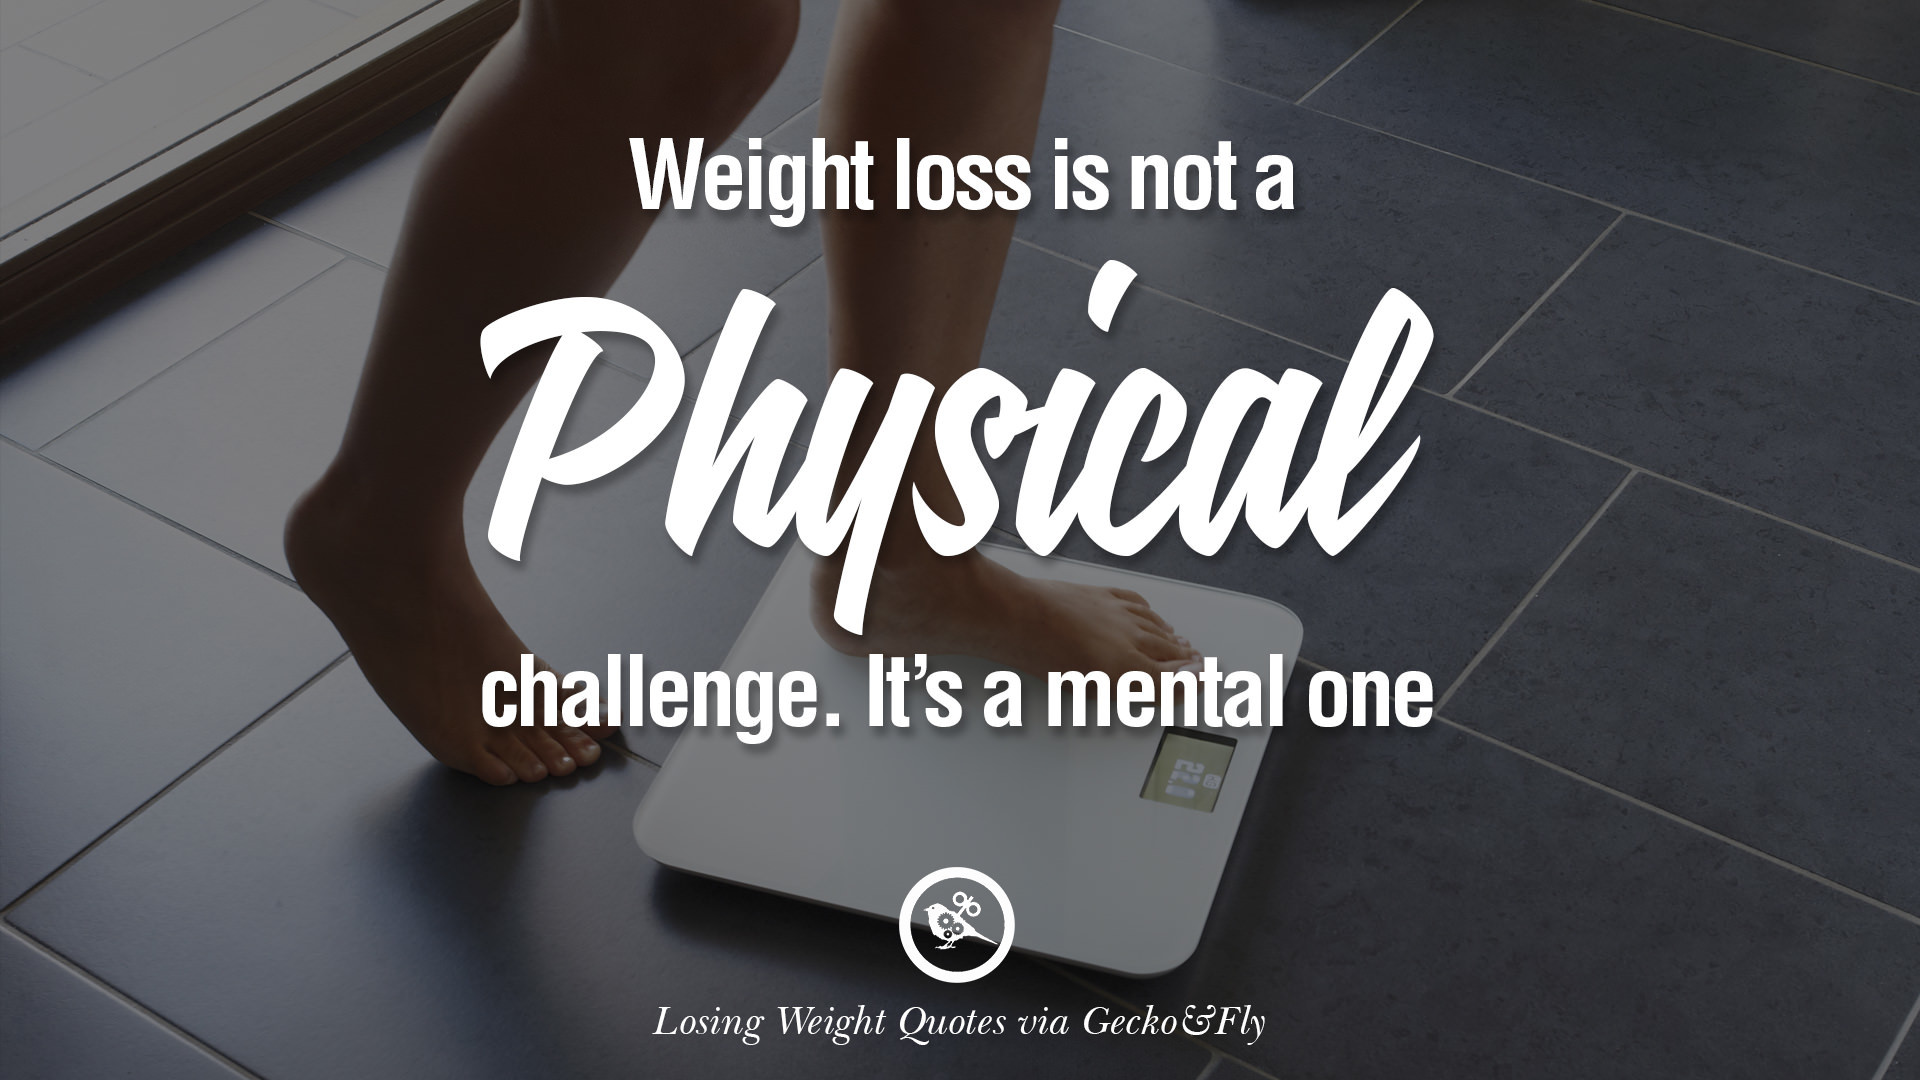 1920x1080 Weight loss is not a physical challenge. It's a mental one. losing weight  diet